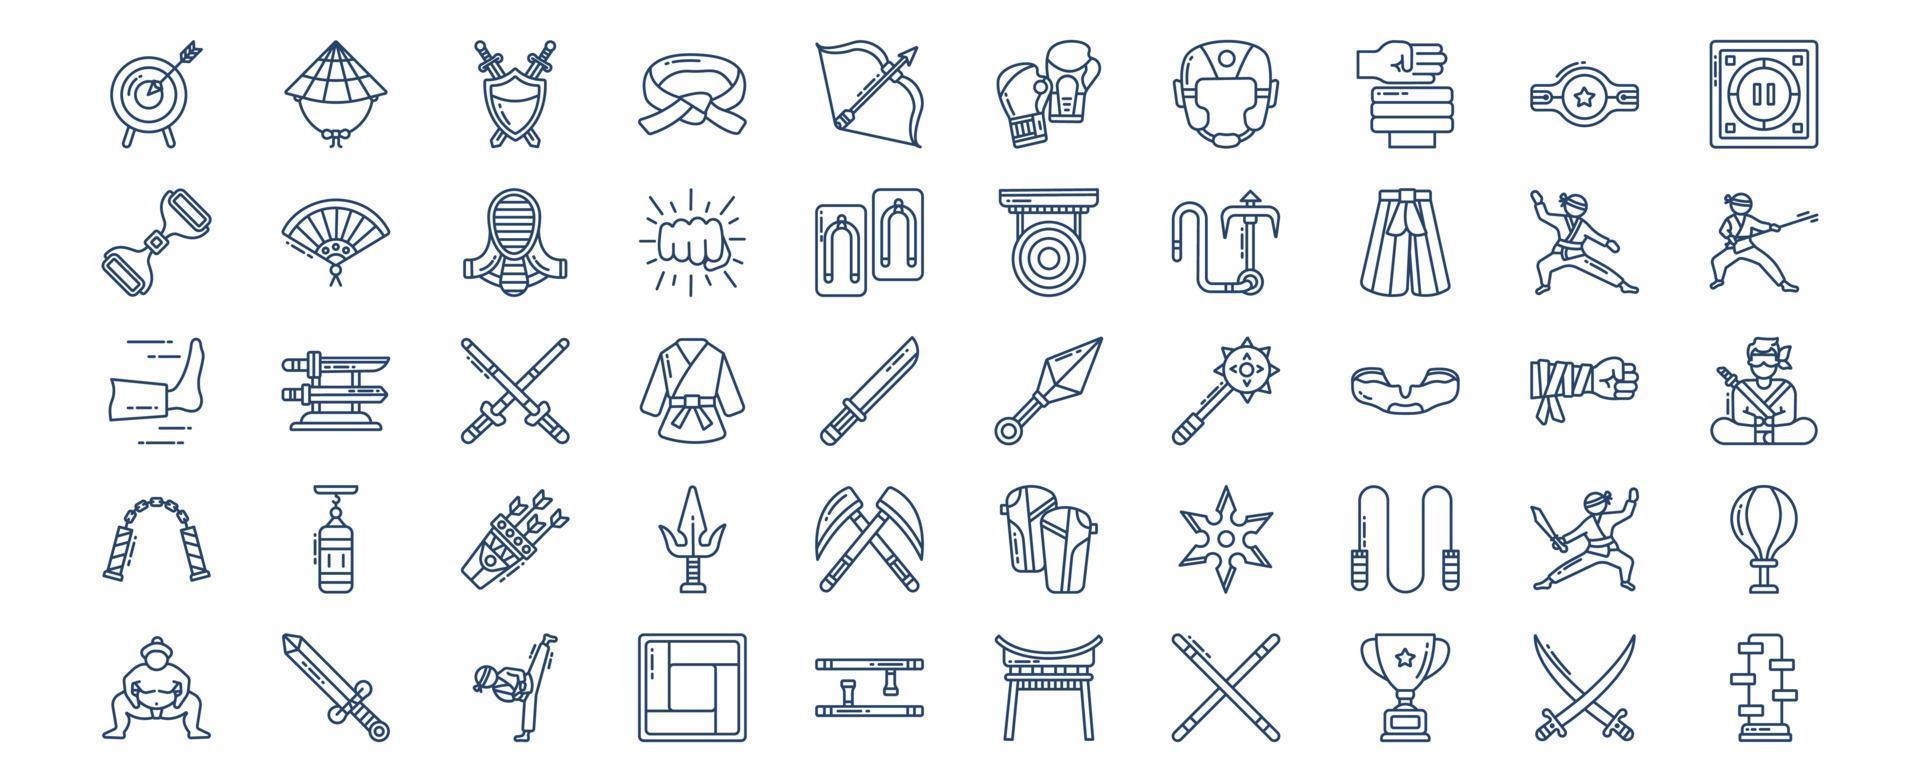 Collection of icons related to Martial arts and karate, including icons like Judo, Ninja, Sumo, Kick and more. vector illustrations, Pixel Perfect set